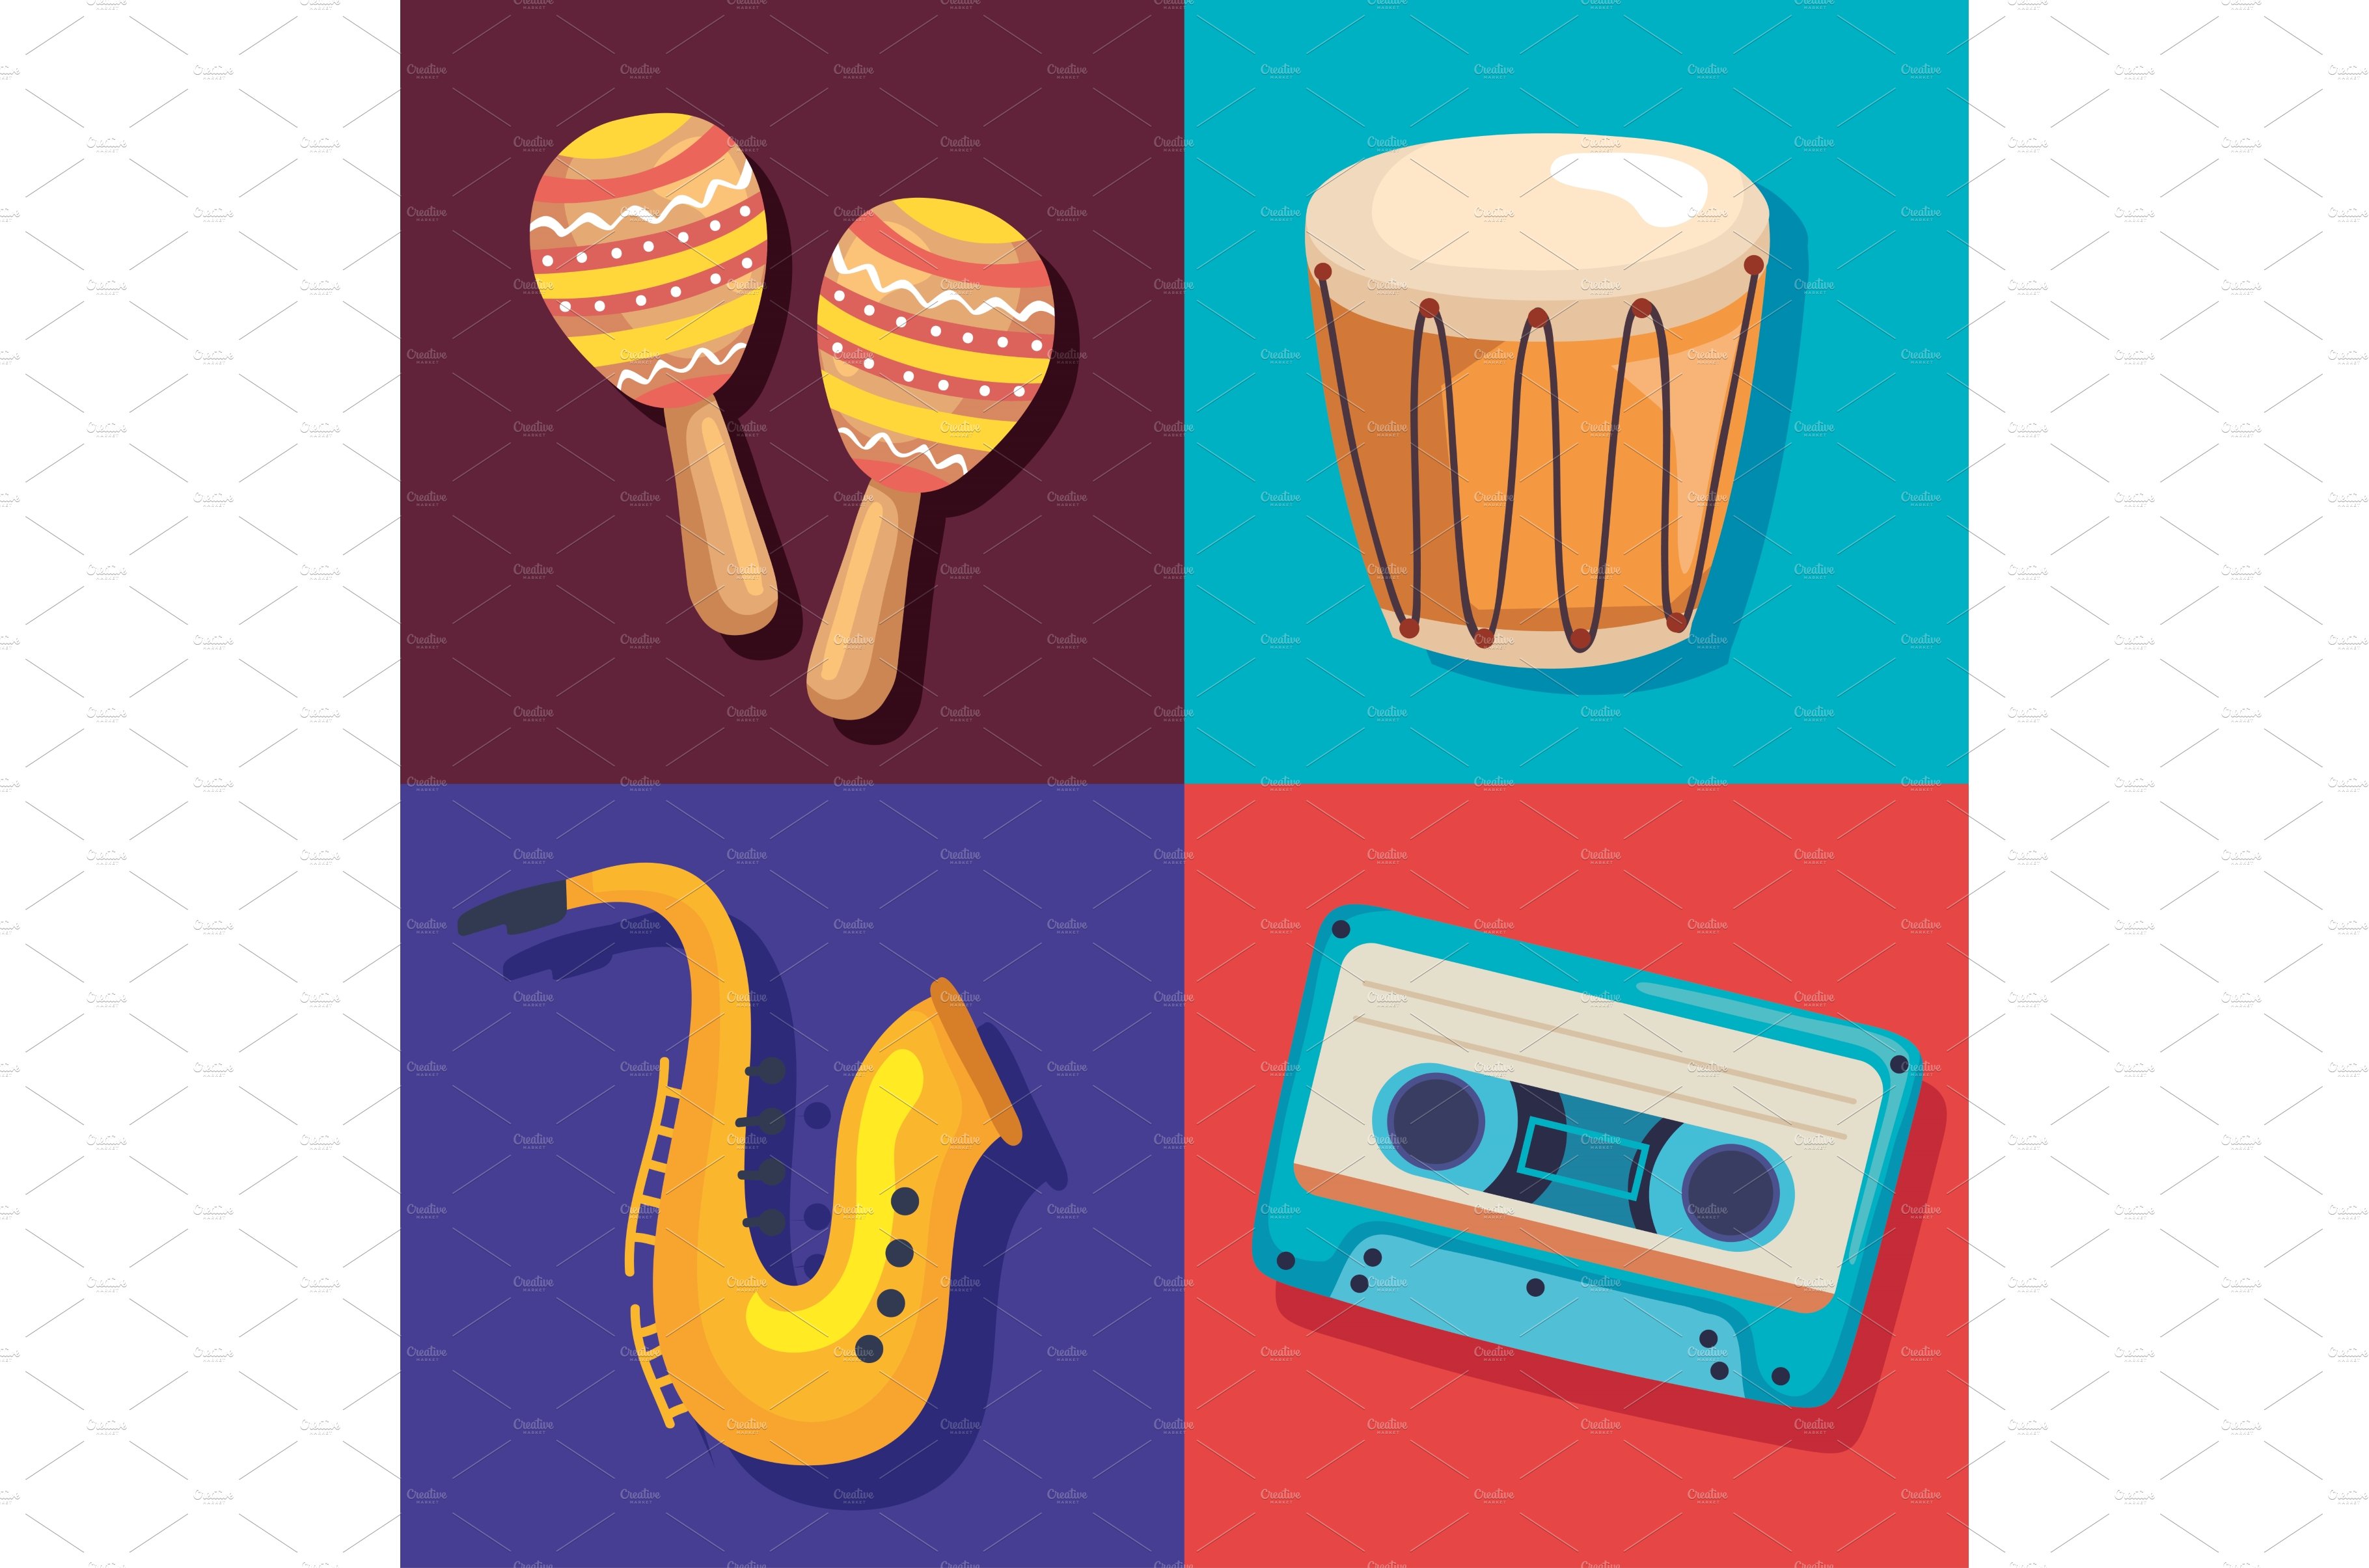 four musical instruments cover image.